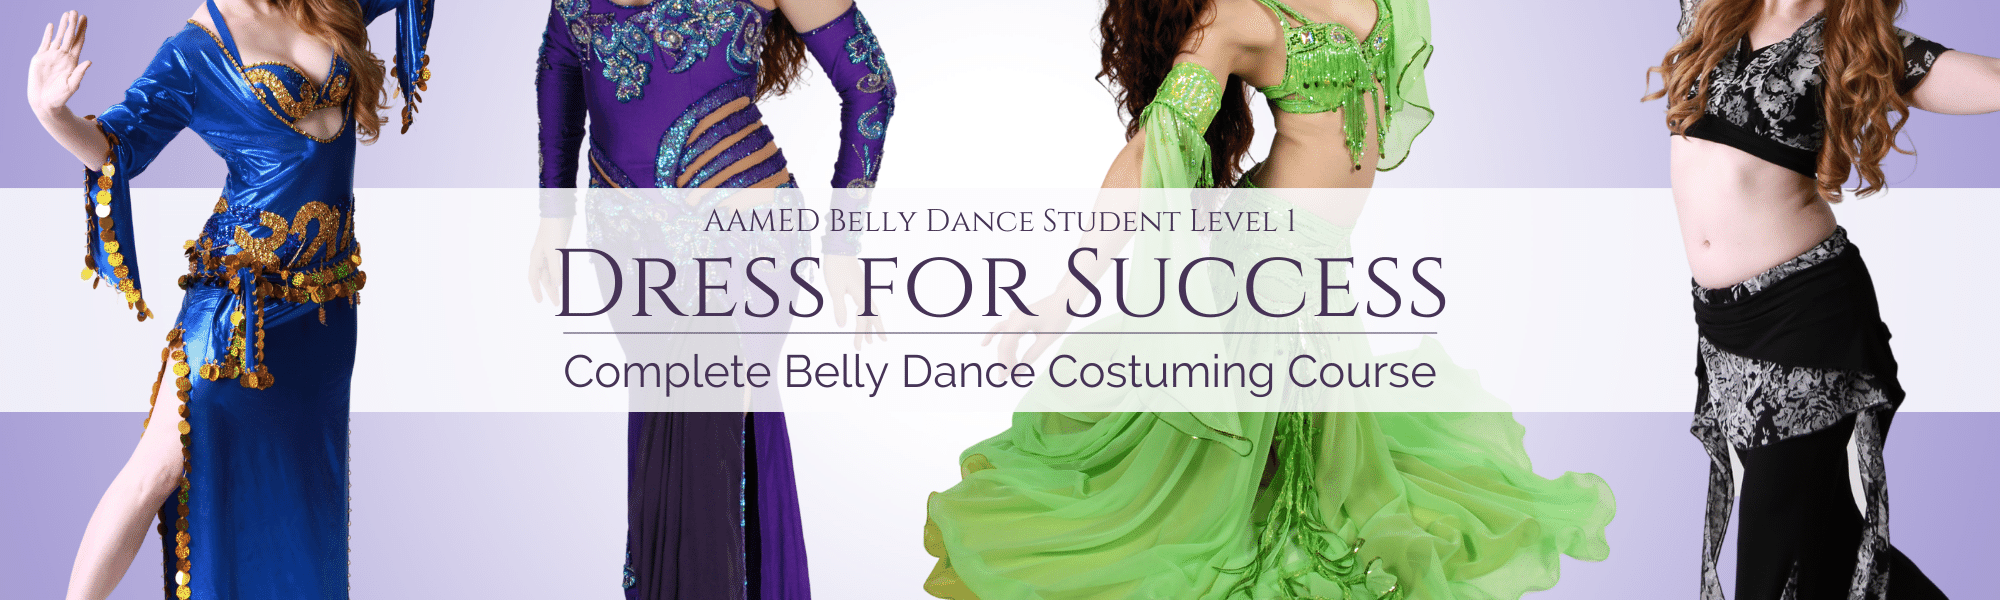 Featured Image Dress for Success: Complete Belly Dance Costuming Course - AAMED Belly Dance Student Level 1 Requirement